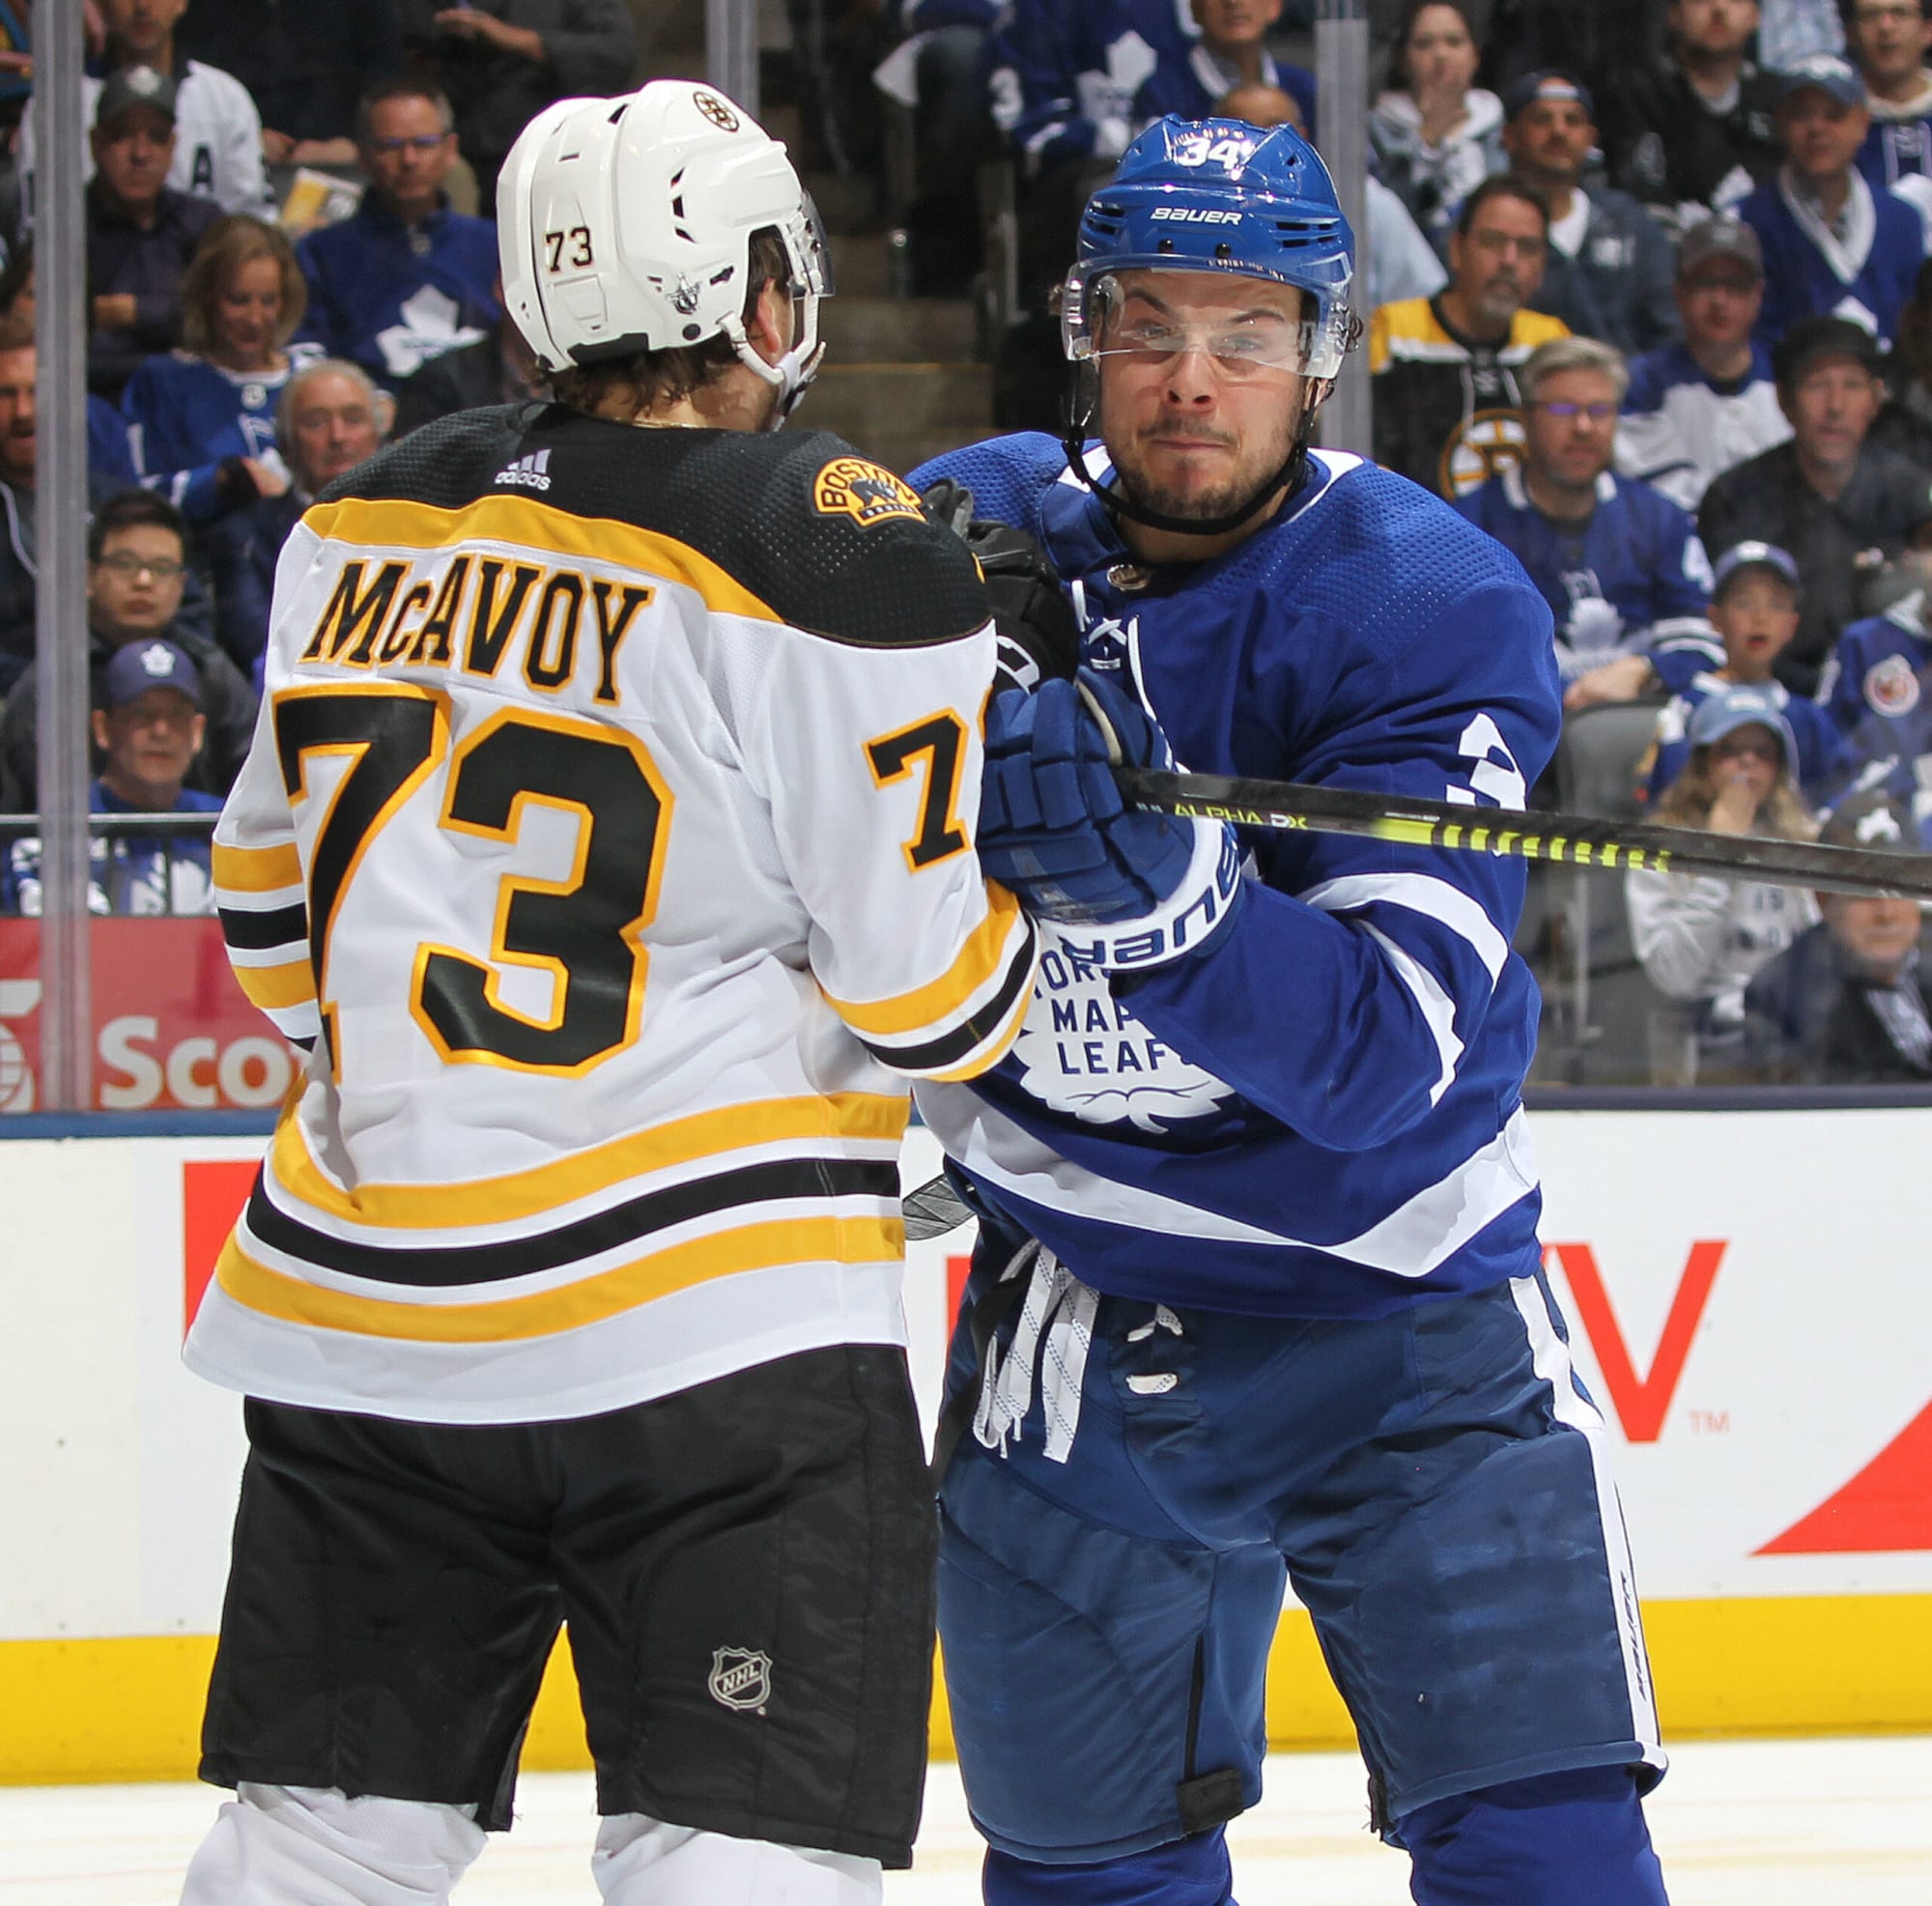 Toronto Maple Leafs Lineup vs Bruins Is an Embarrassment